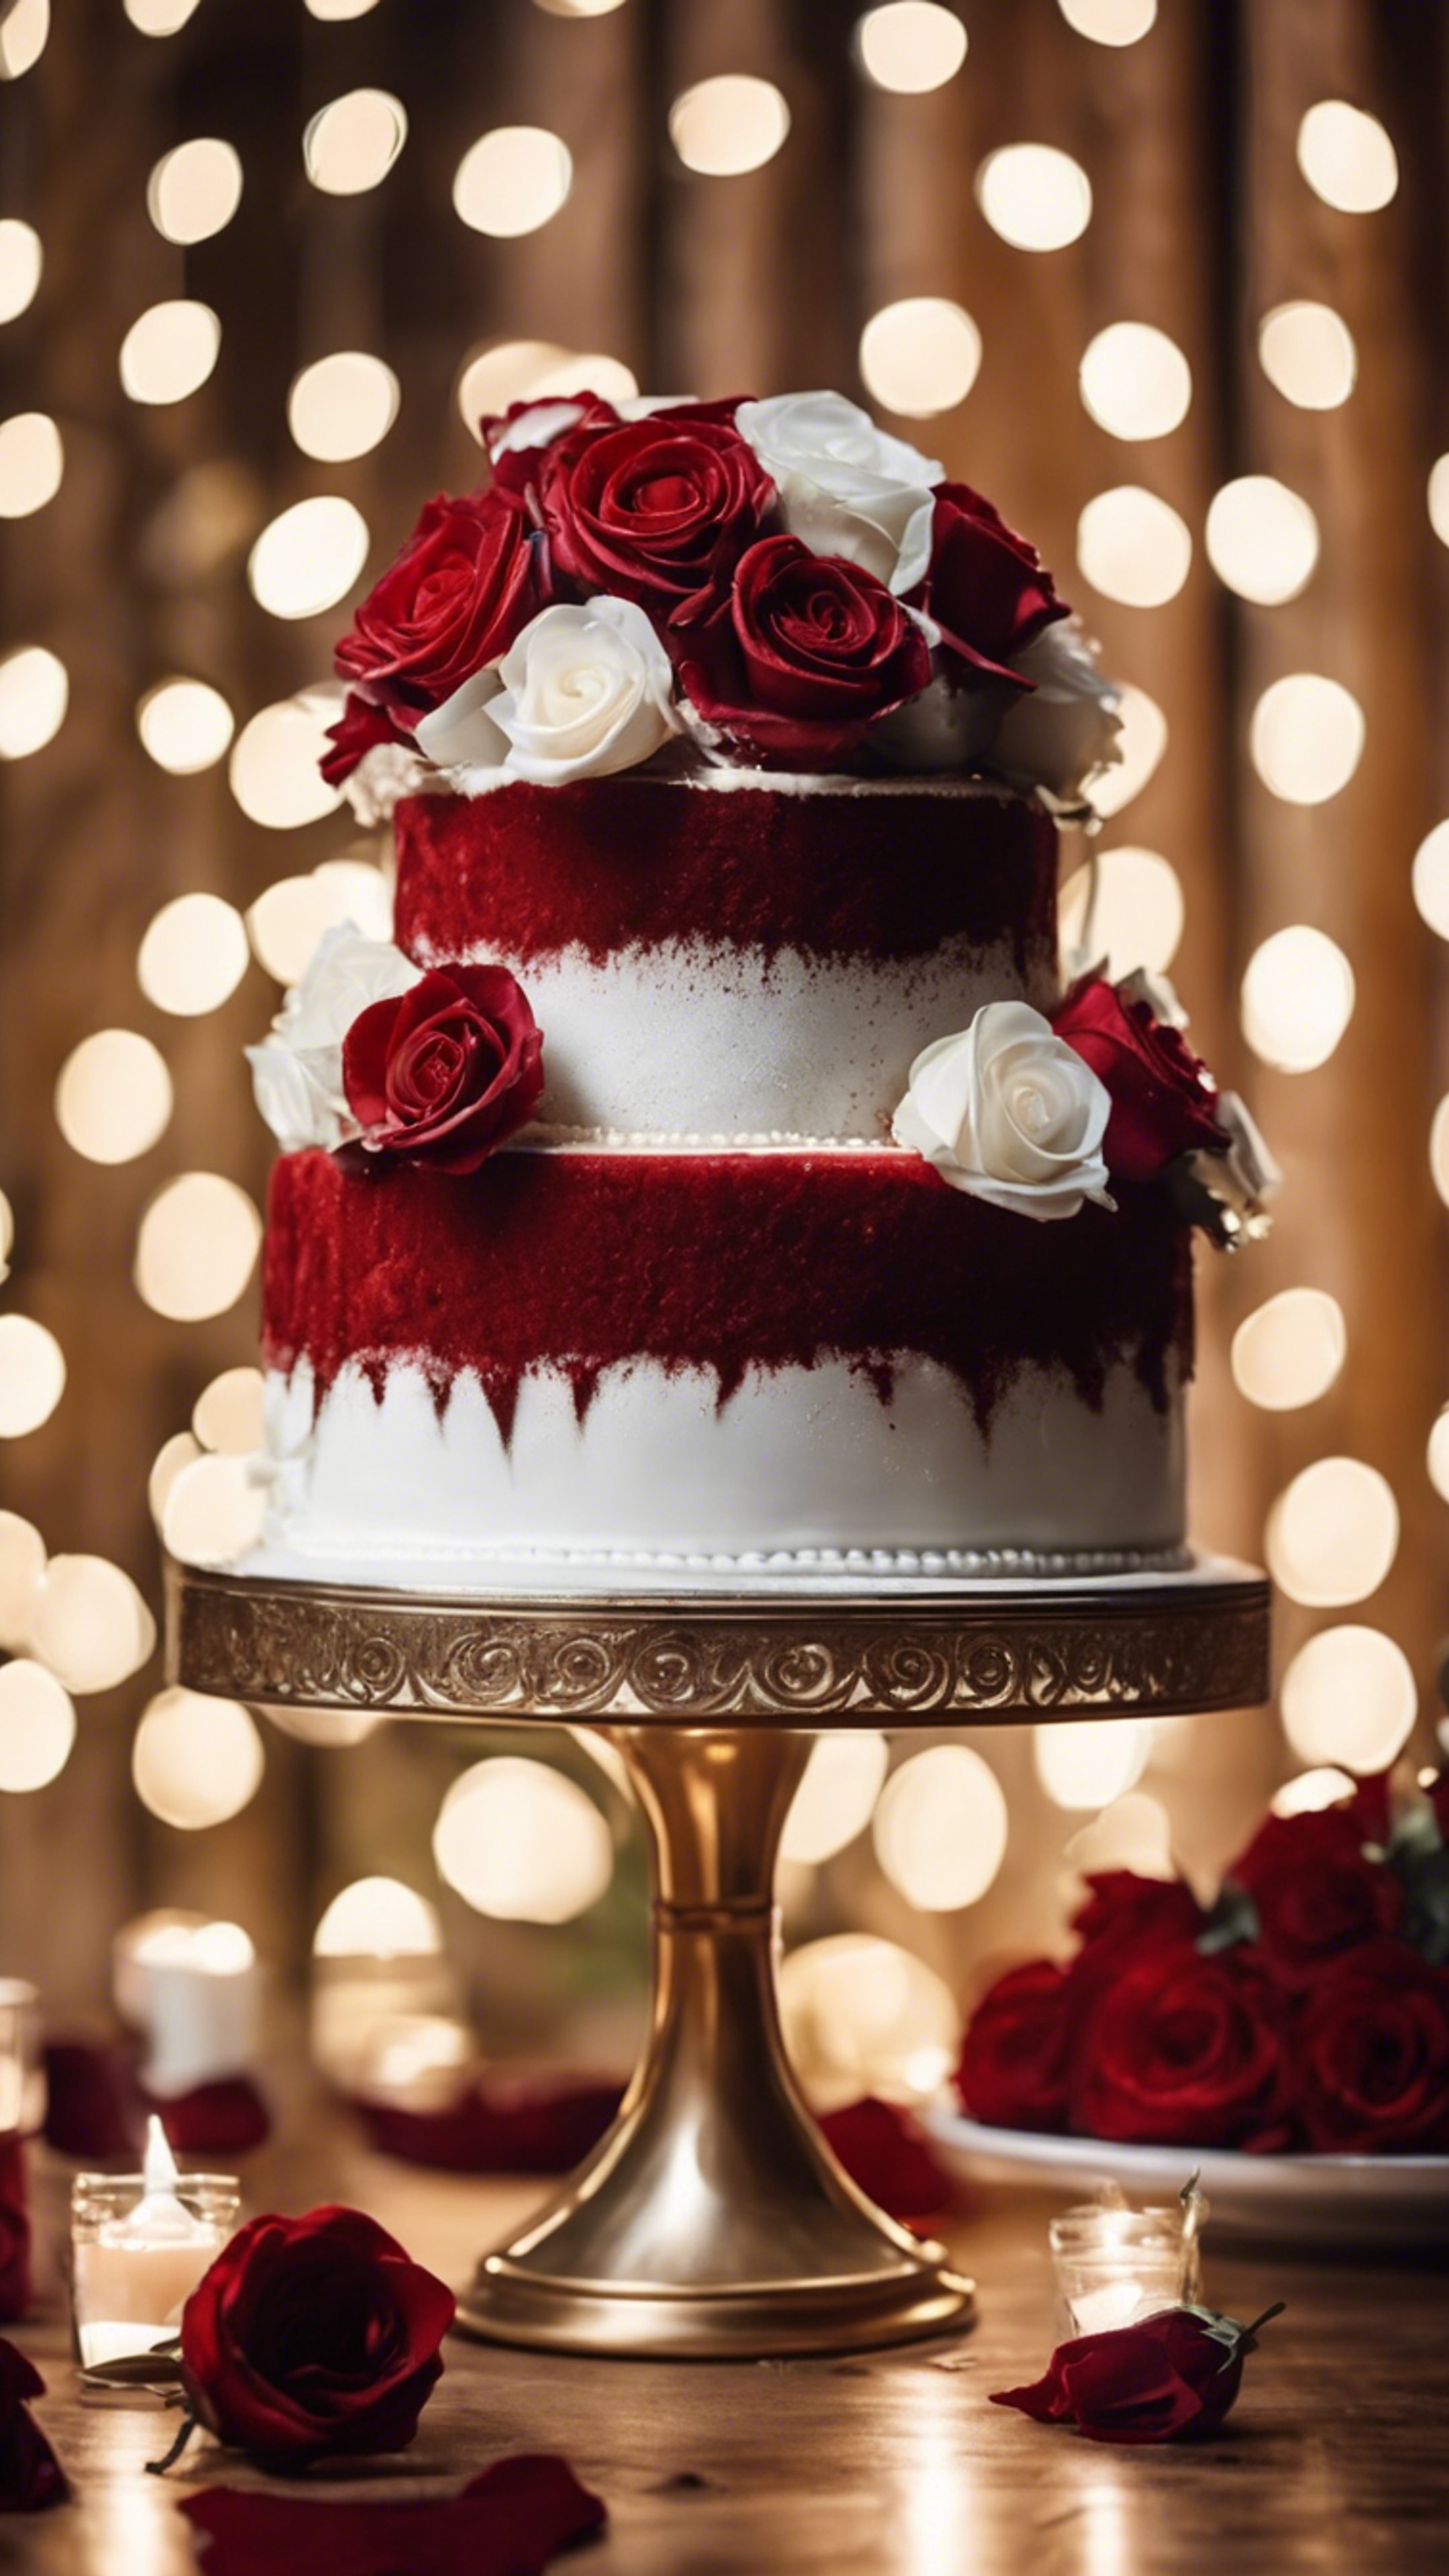 Three-tiered red velvet wedding cake adorned with white roses, against a backdrop of twinkling fairy lights. Tapeta na zeď[b48557e9e8f84a90b888]